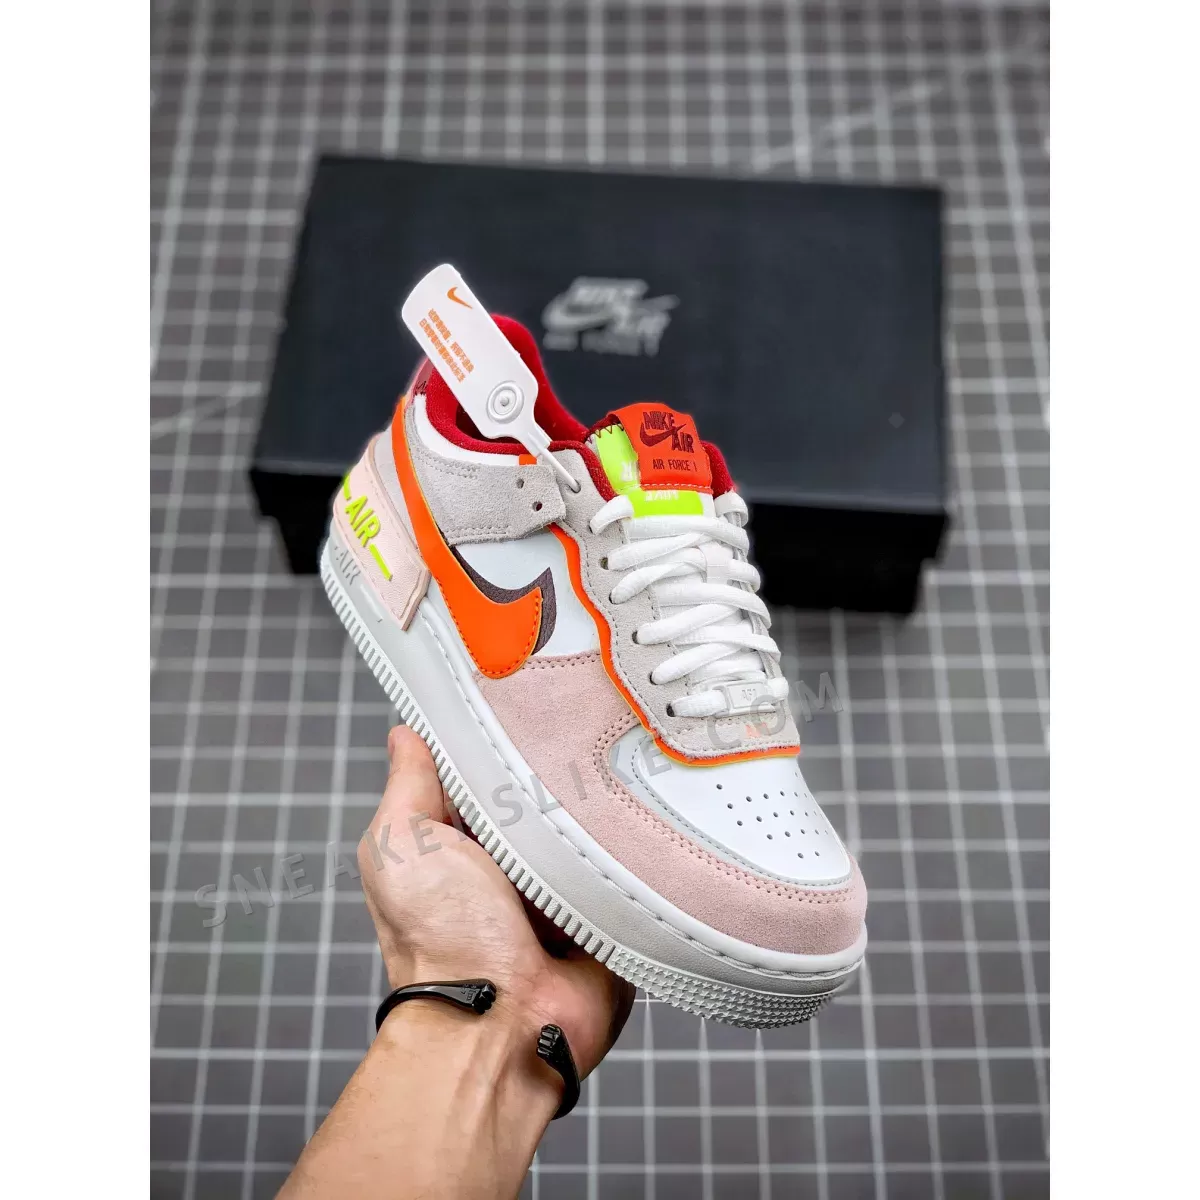 Nike Air Force 1 Shadow Team Red Volt For Womens CU8591-600 #wmns air force 1 shadow 'team red orange pearl'